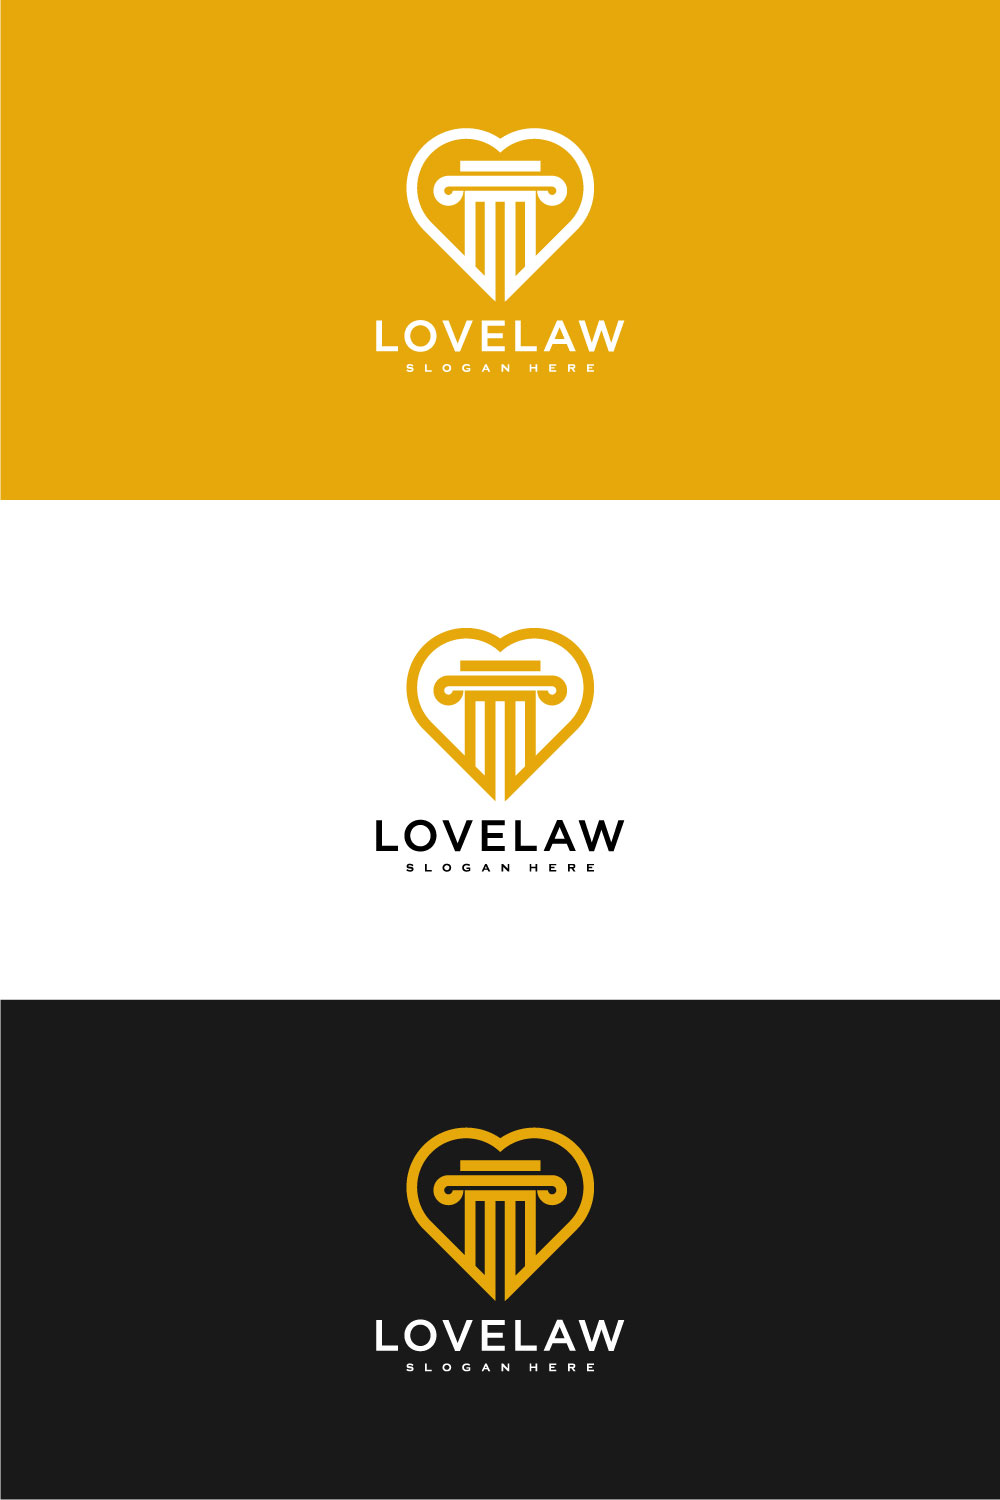 Love and Law Firm Logo Vector Design pinterest image.